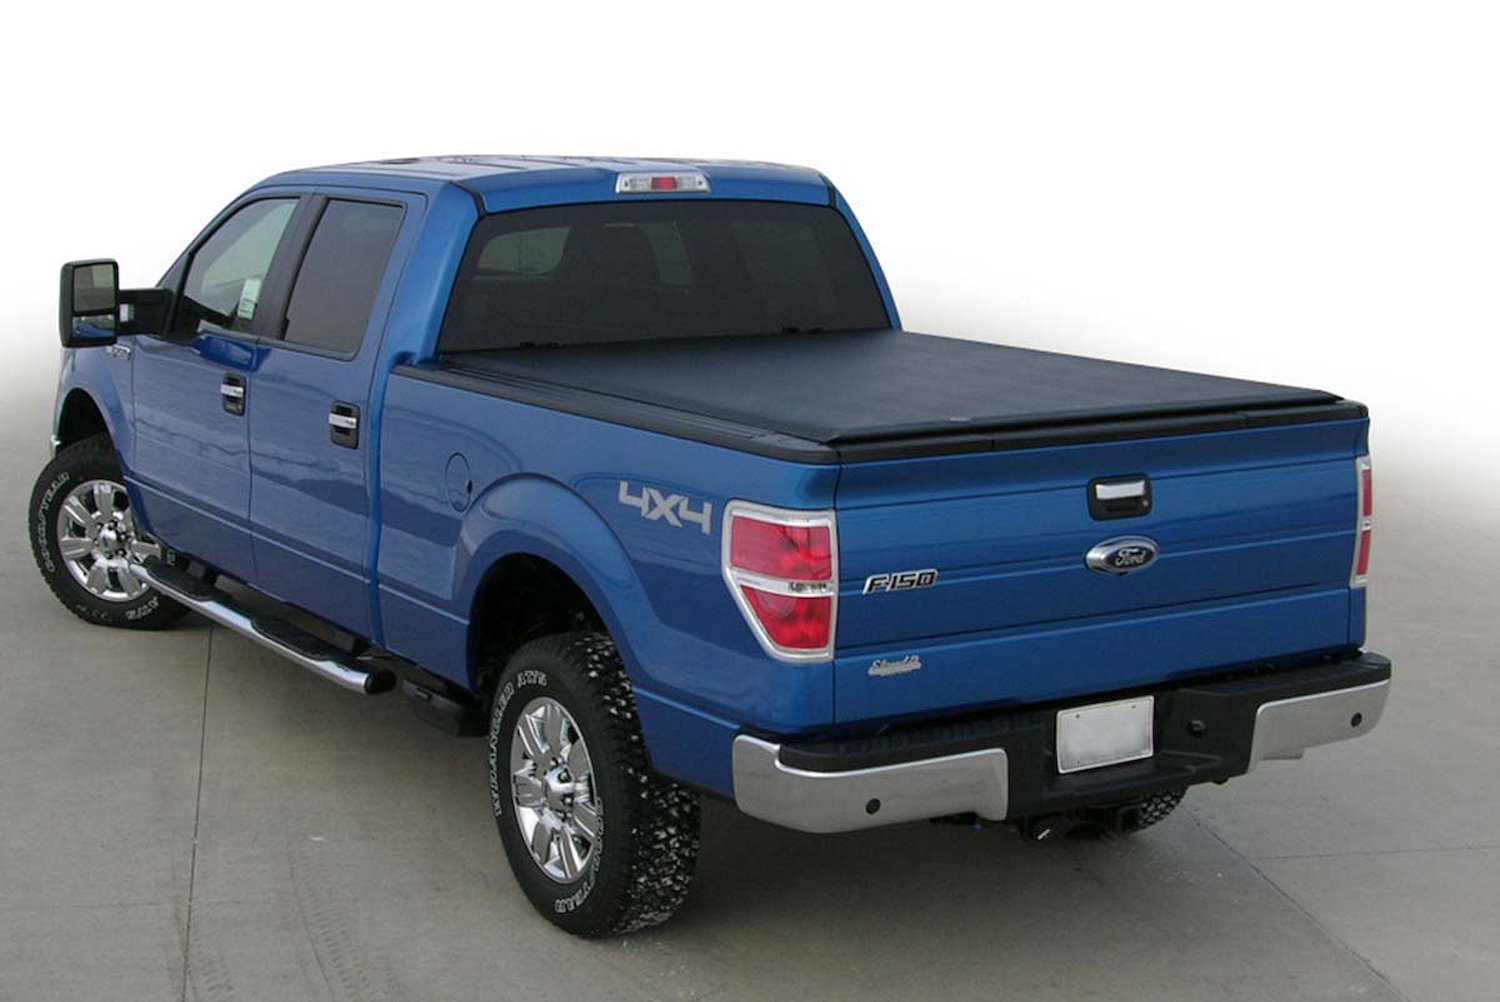 LORADO Roll-Up Tonneau Cover, Fits Select Ford F-150, with 8 ft. Bed